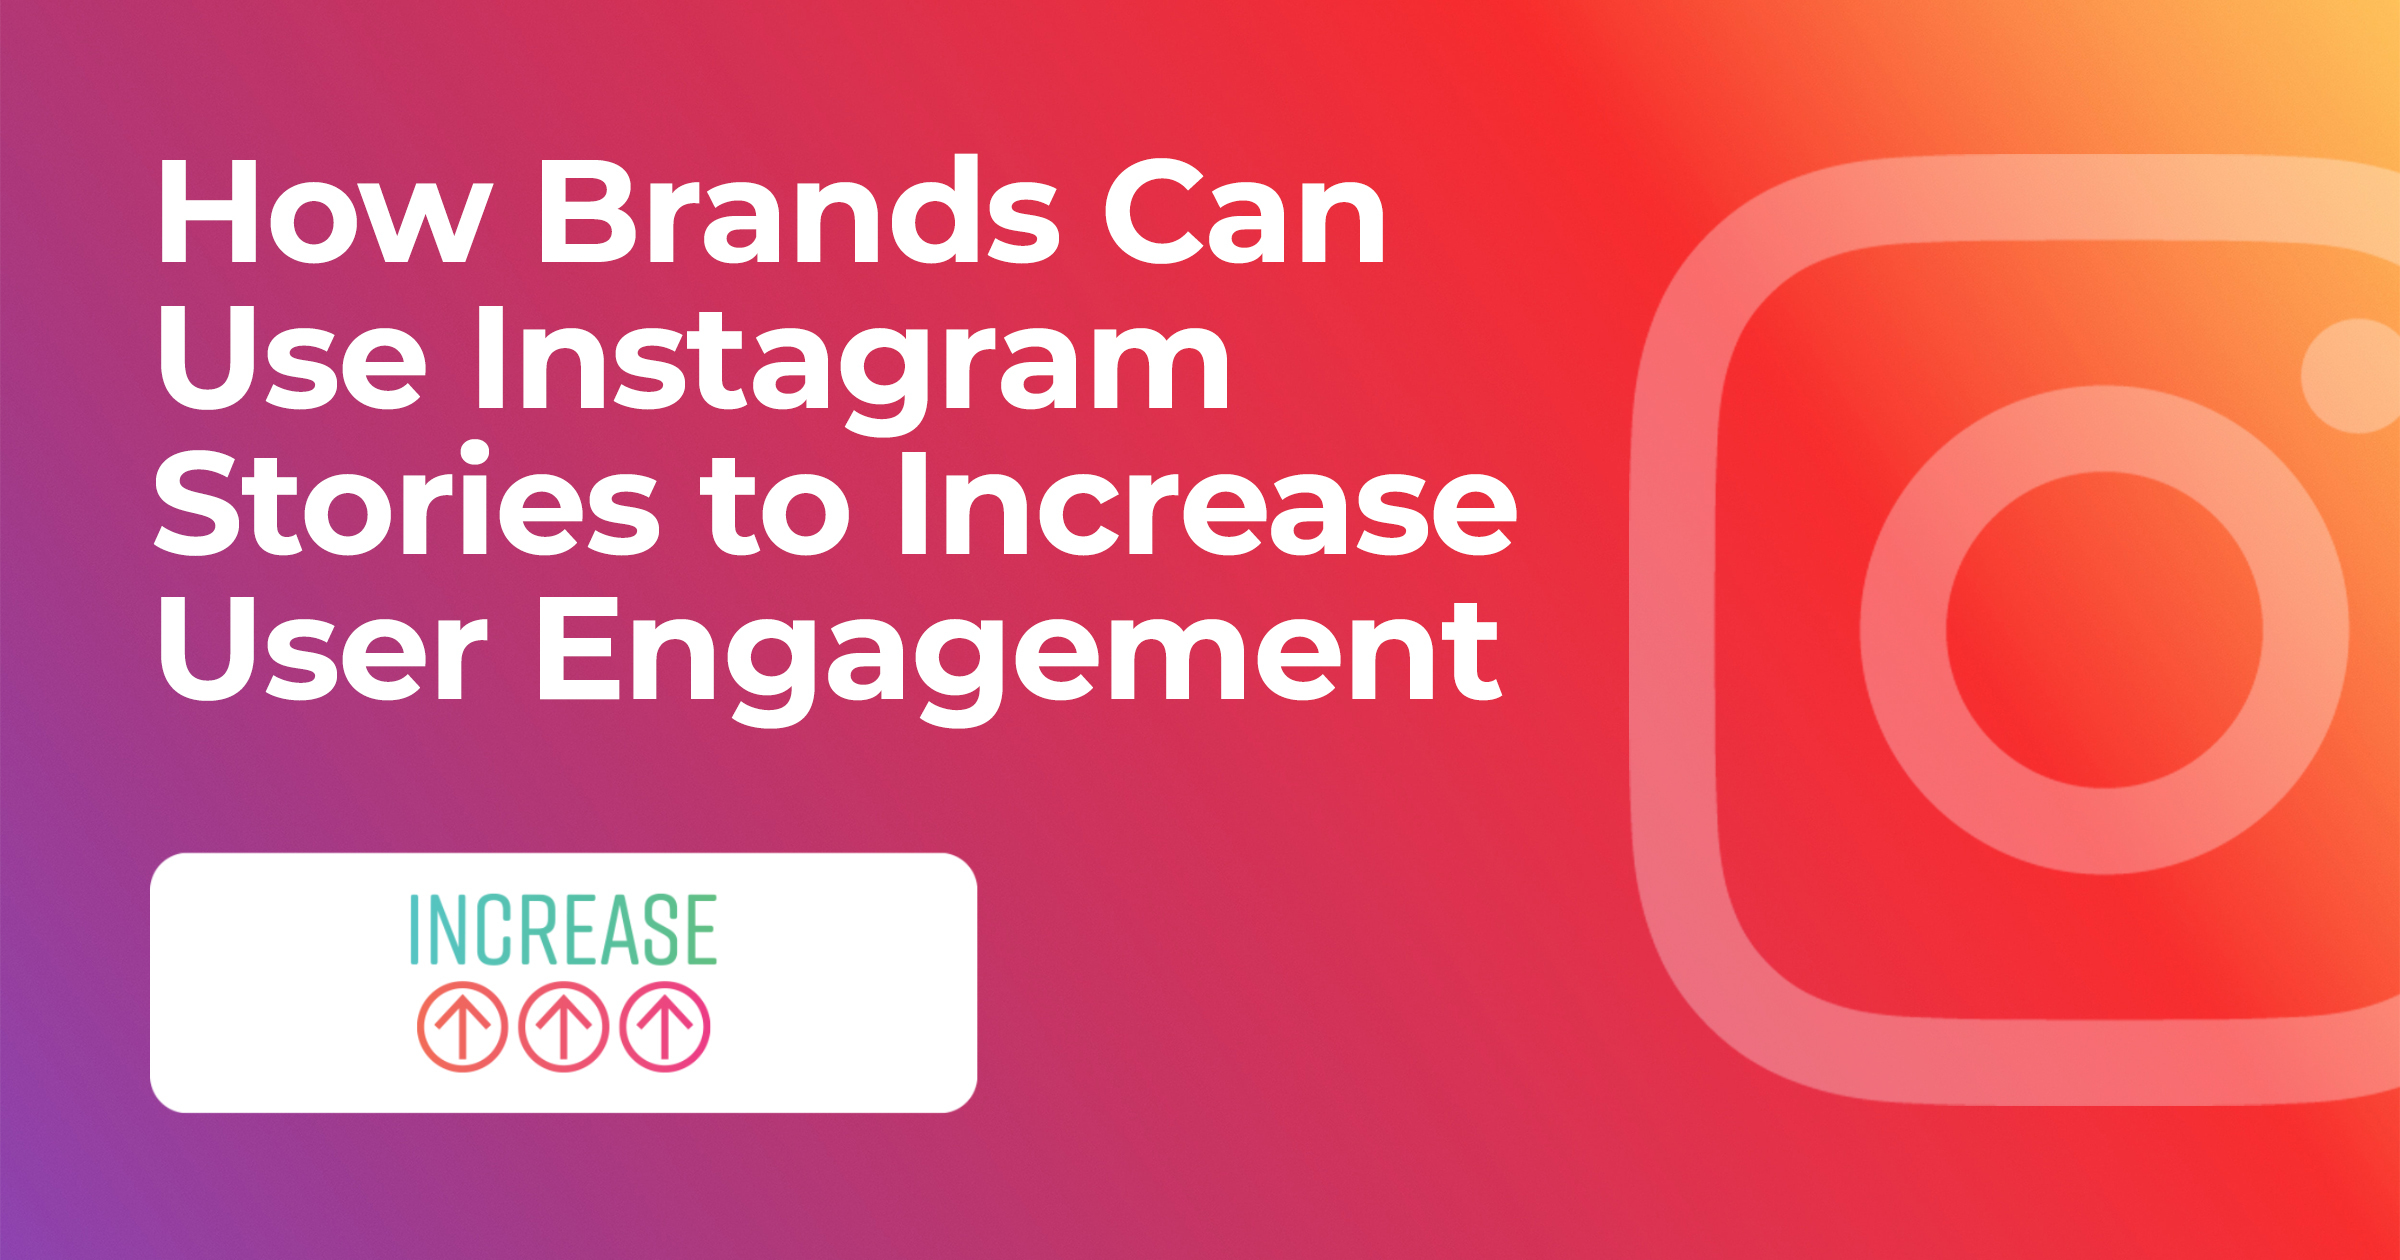 How Brands Can Use Instagram Stories to Increase User Engagement